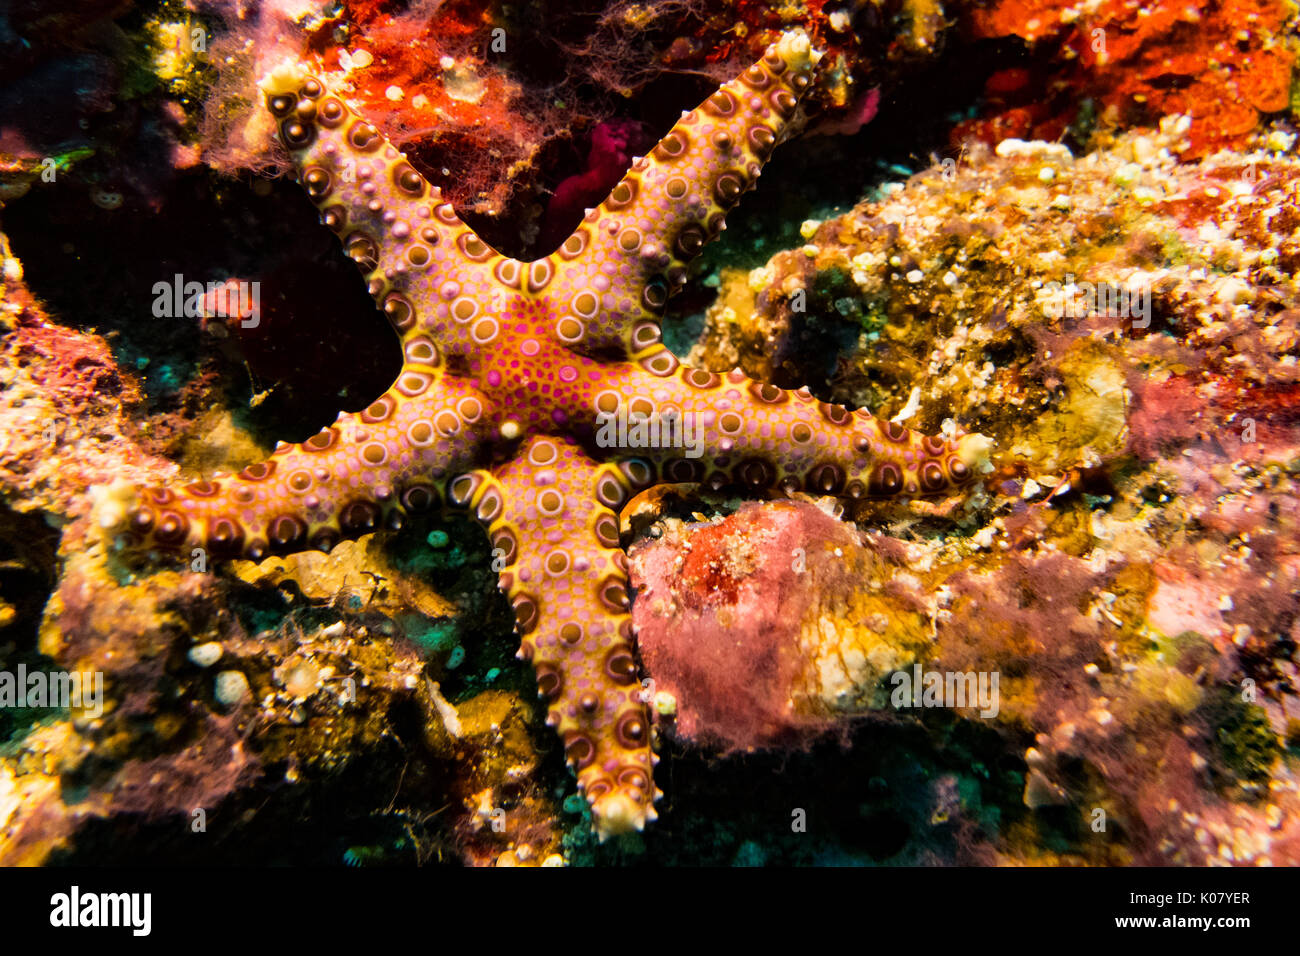 A psychedelic colored sea star seen while diving at Swallow's cave, Vava'u group, Tonga Stock Photo